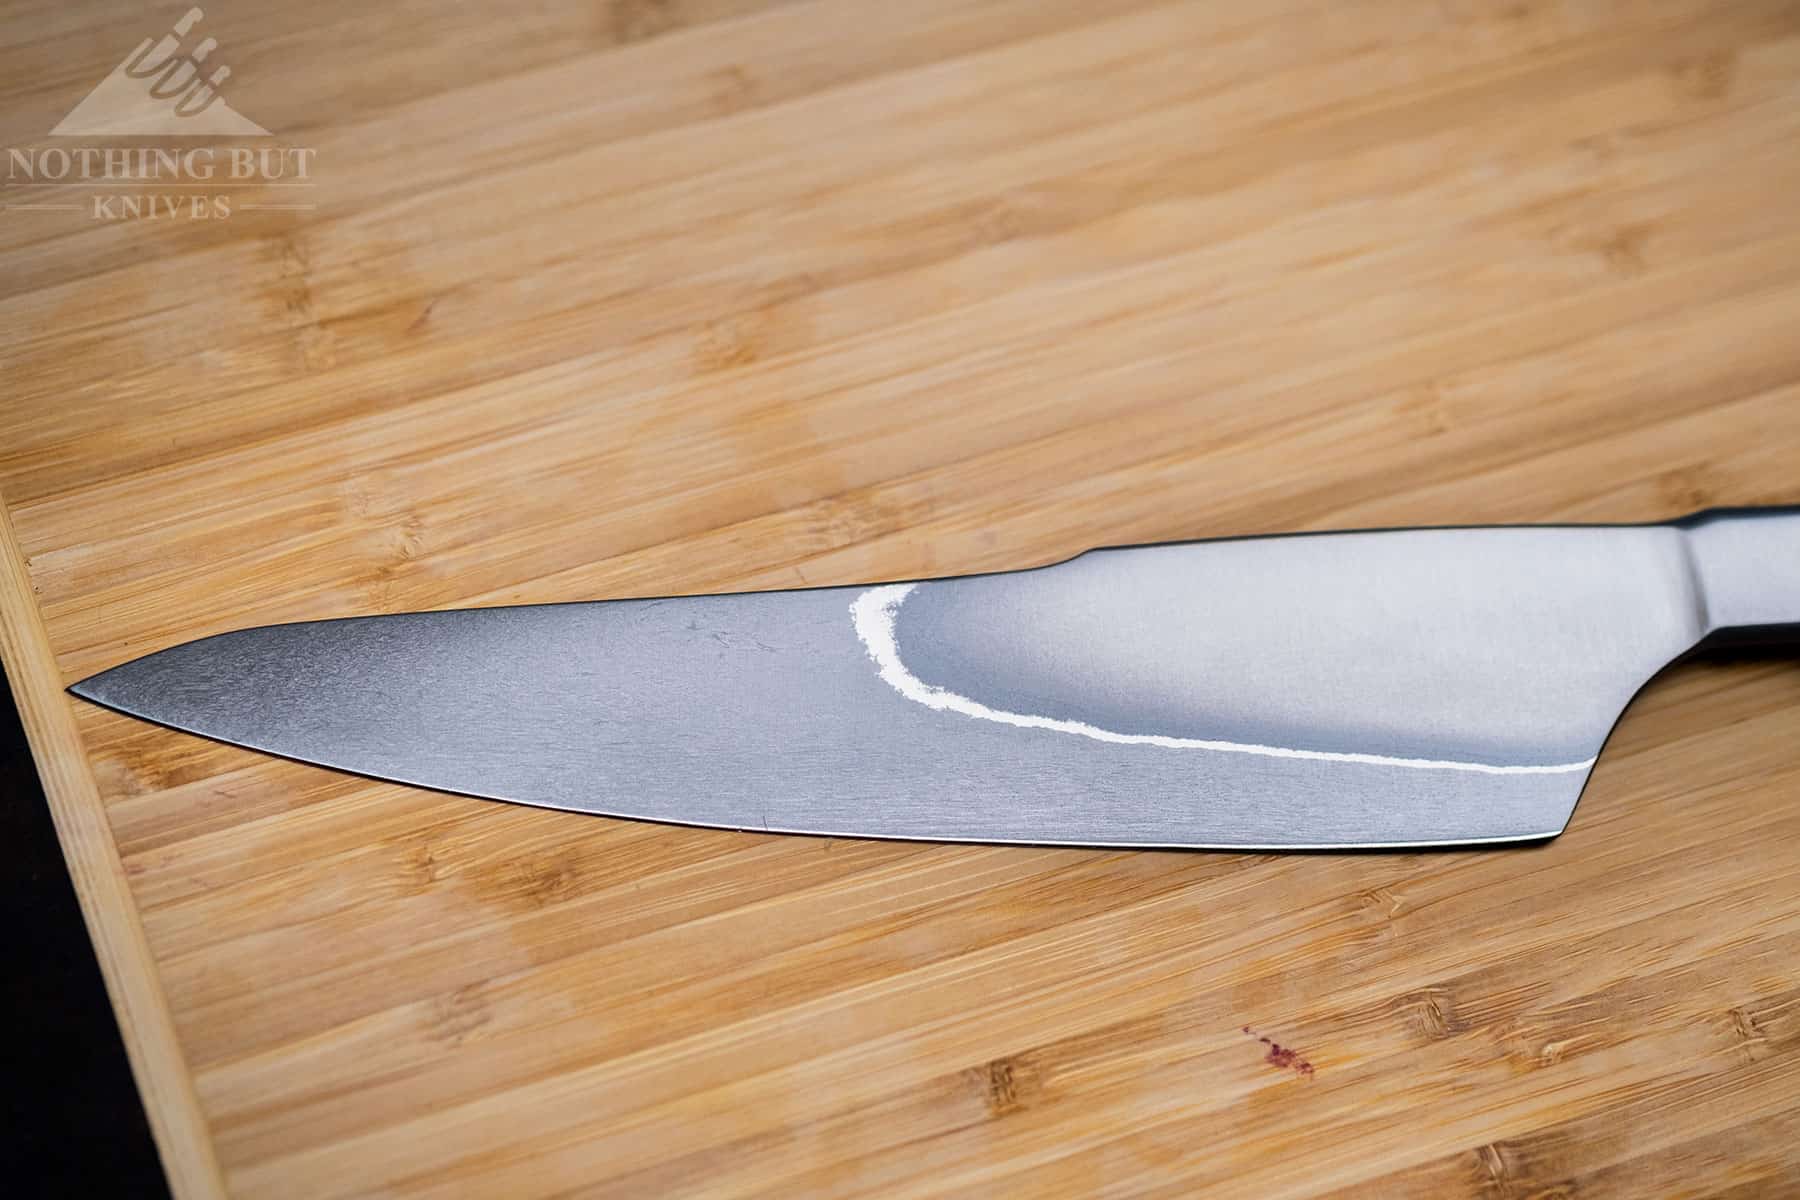 This close up of the XinCraft 8.4 inch knife blade shows its rustic design and San Mai lines. 